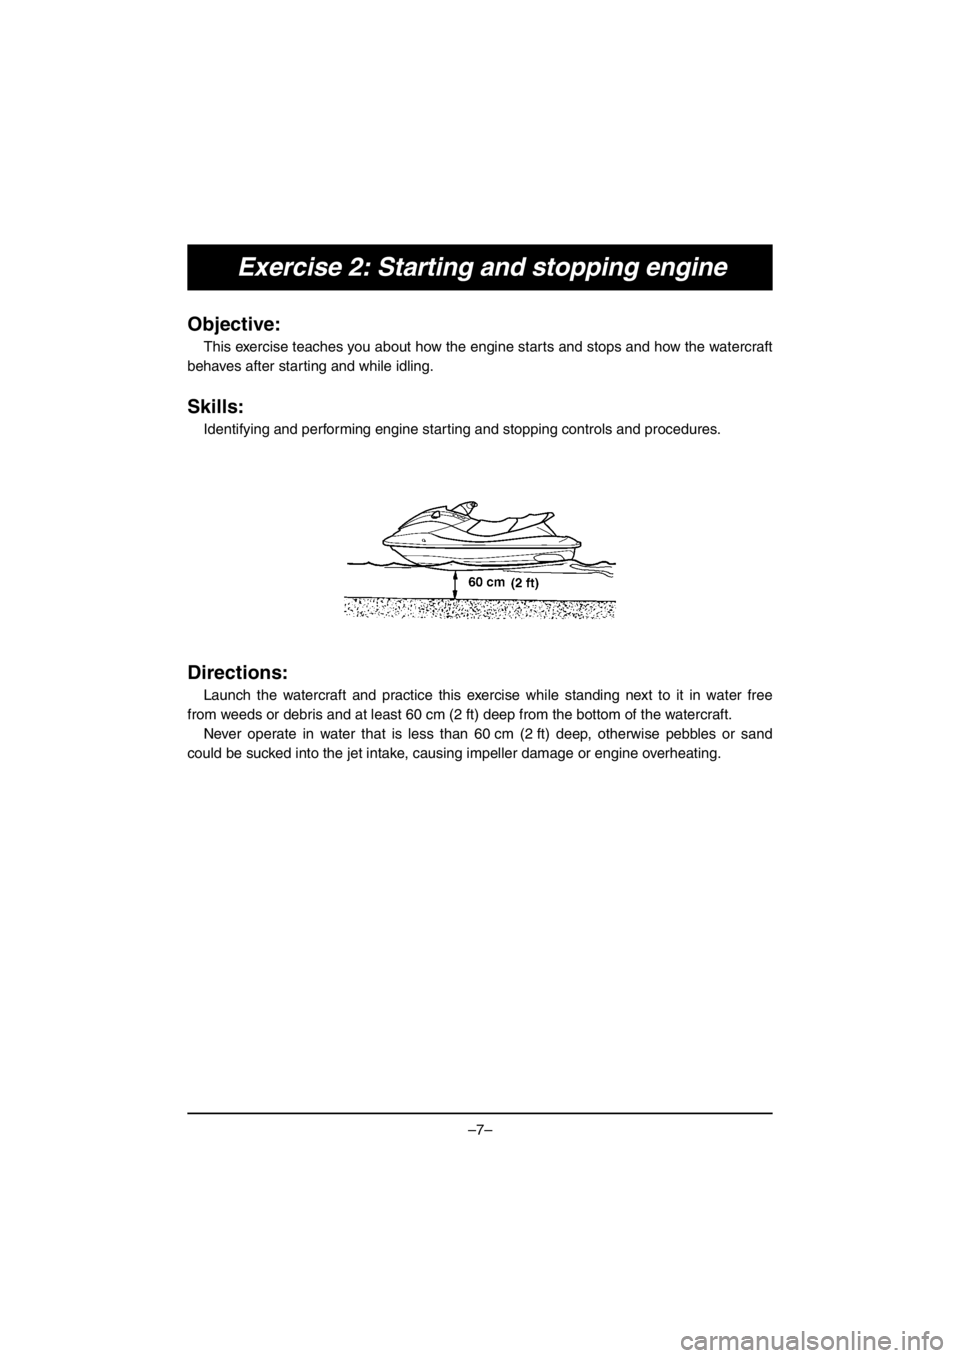 YAMAHA EX SPORT 2017  Owners Manual –7–
Exercise 2: Starting and stopping engine
Objective:
This exercise teaches you about how the engine starts and stops and how the watercraft
behaves after starting and while idling.
Skills:
Iden